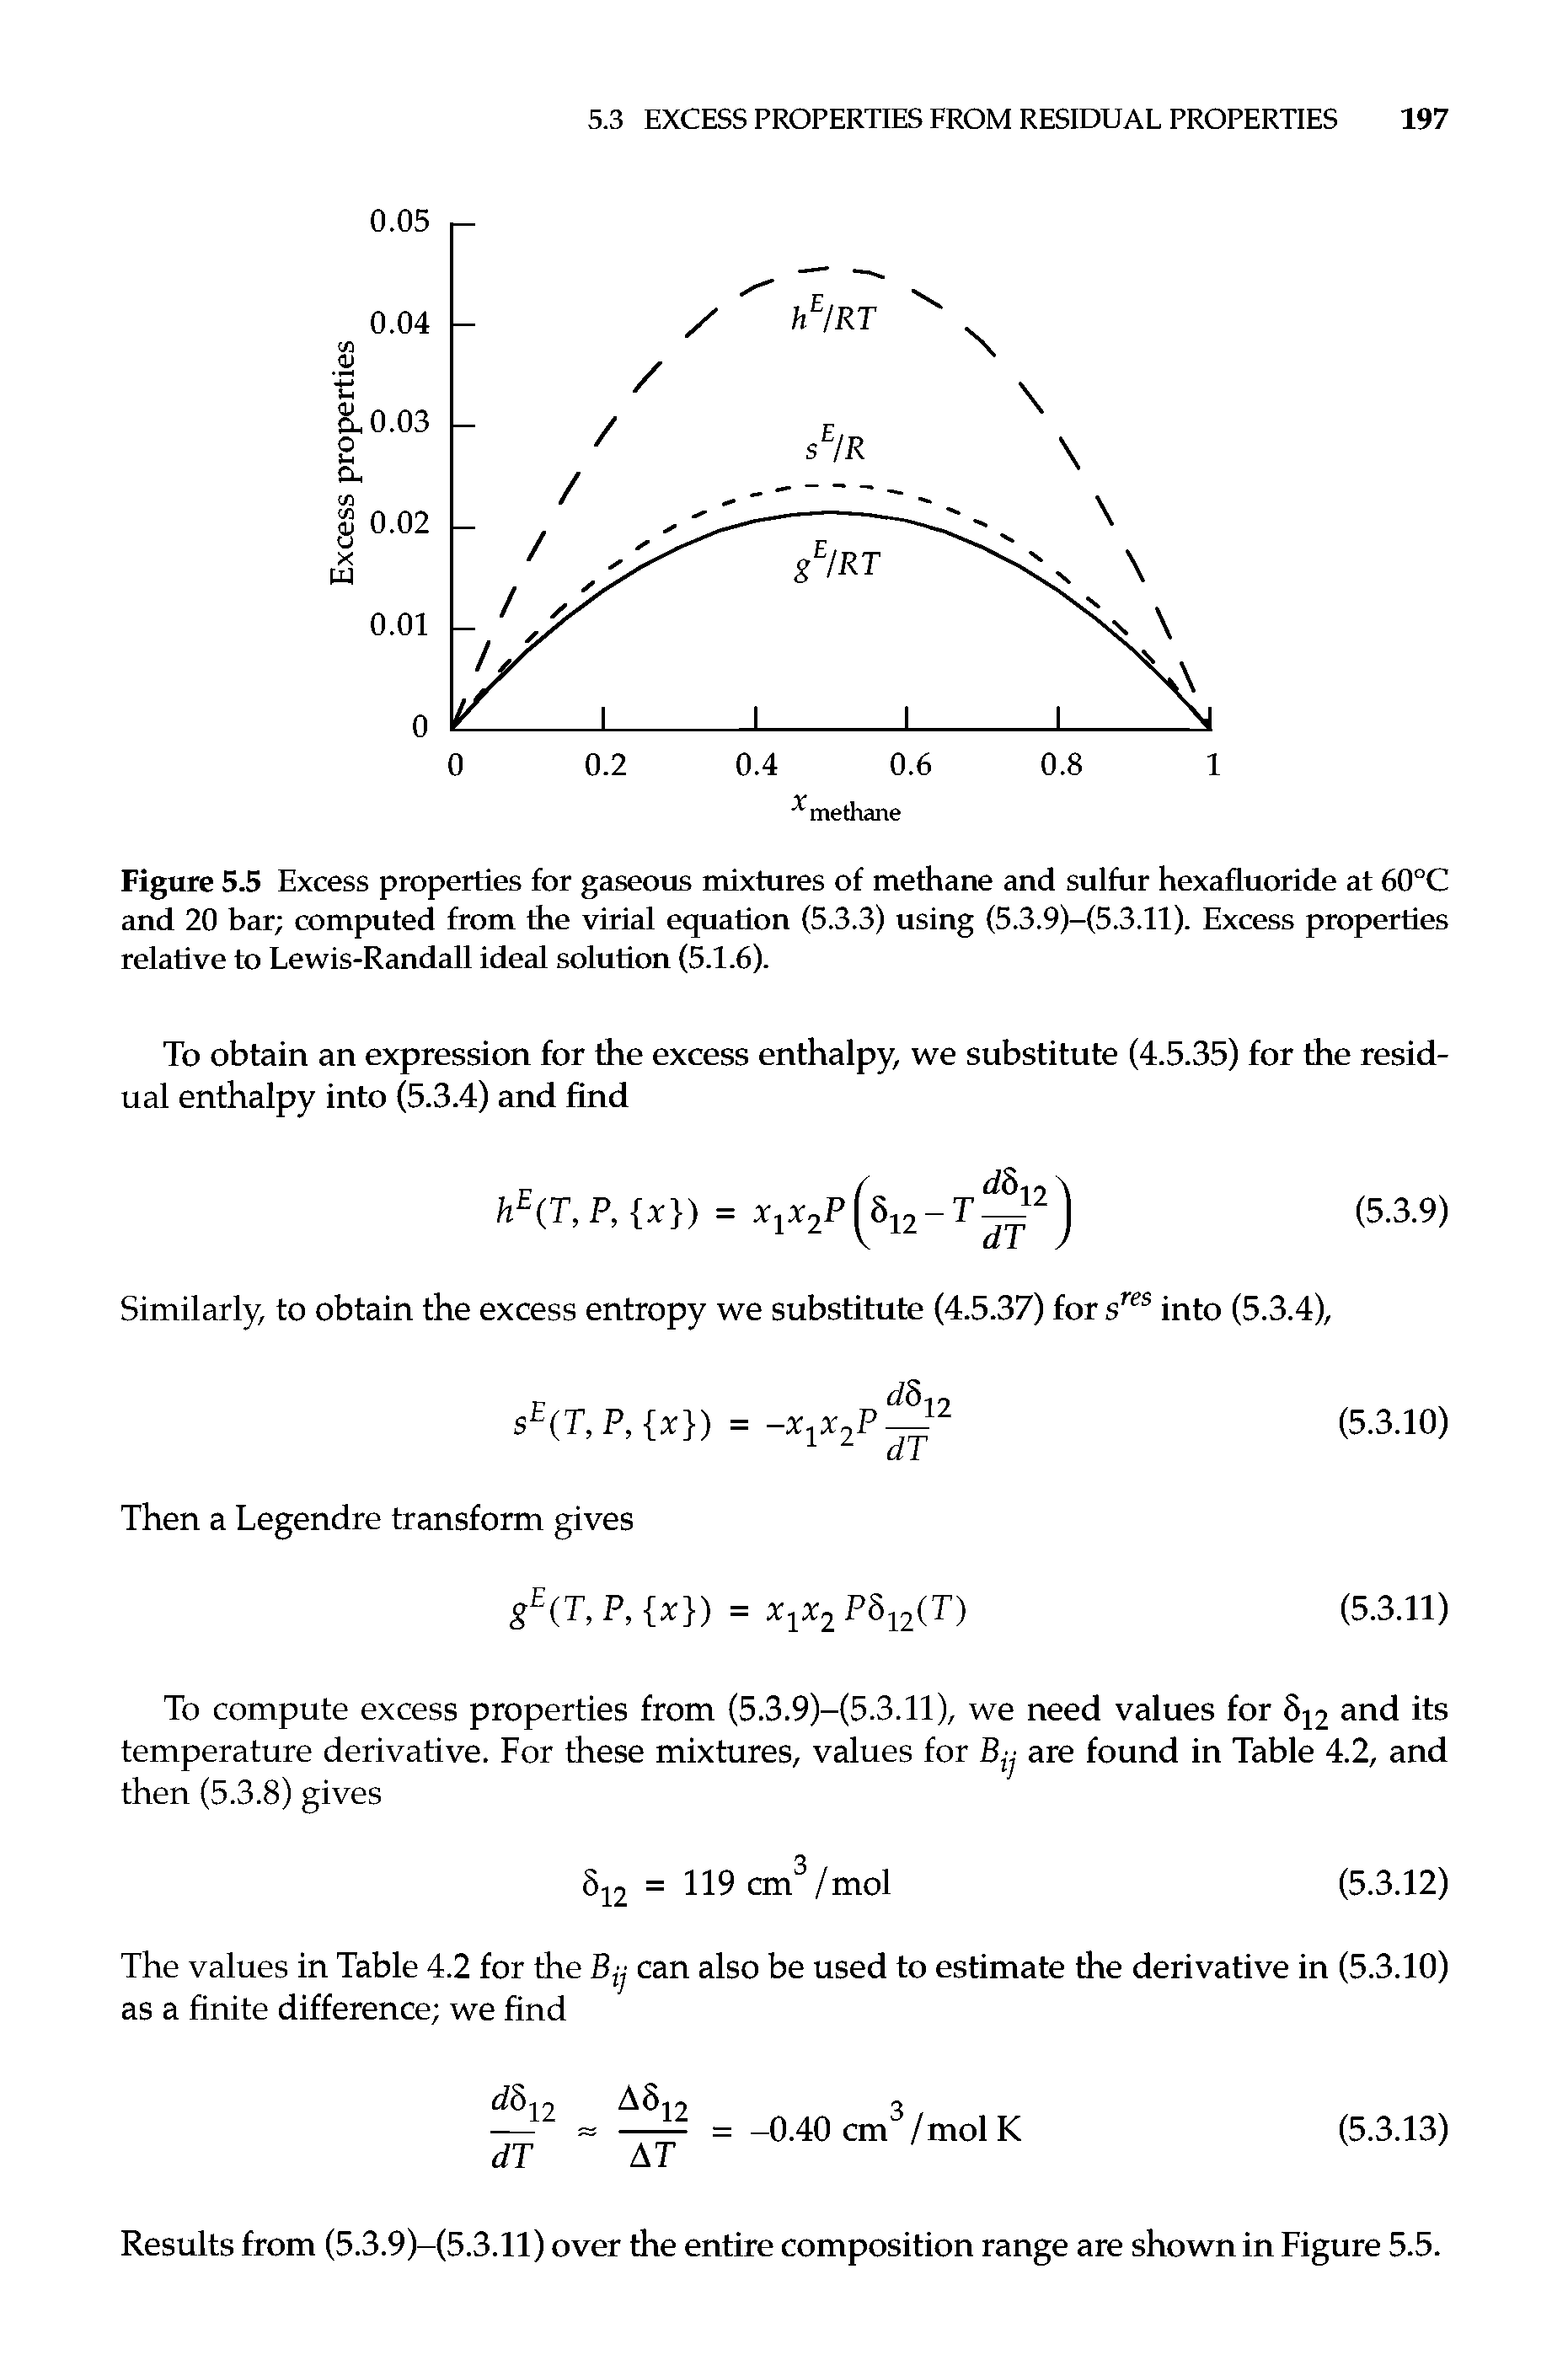 Figure 5.5 Excess properties for gaseous mixtures of methane and sulfur hexafluoride at 60°C and 20 bar computed from the virial equation (5.3.3) using (5.3.9)-(5.3.11). Excess properties relative to Lewis-Randall ideal solution (5.1.6).